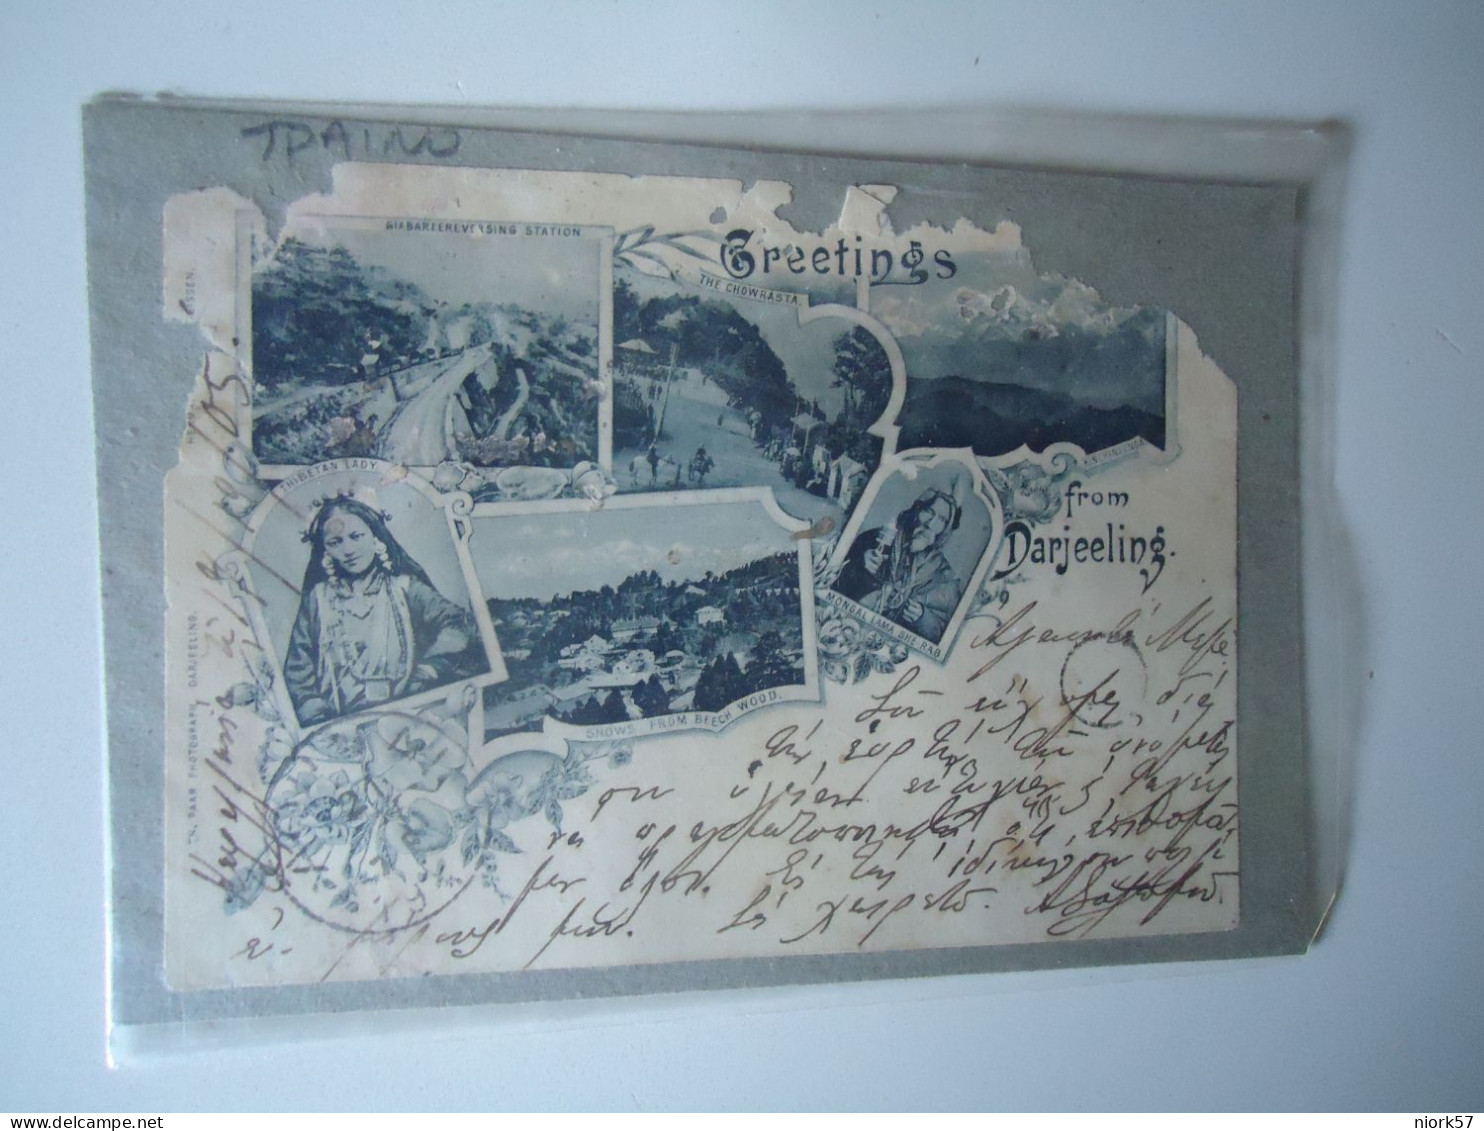 INDIA   RARE  POSTCARDS  1905 GREETING FROM DARJEELING  CORNER CUP  MORE  PURHASES 10%  DISSCOUNT - India